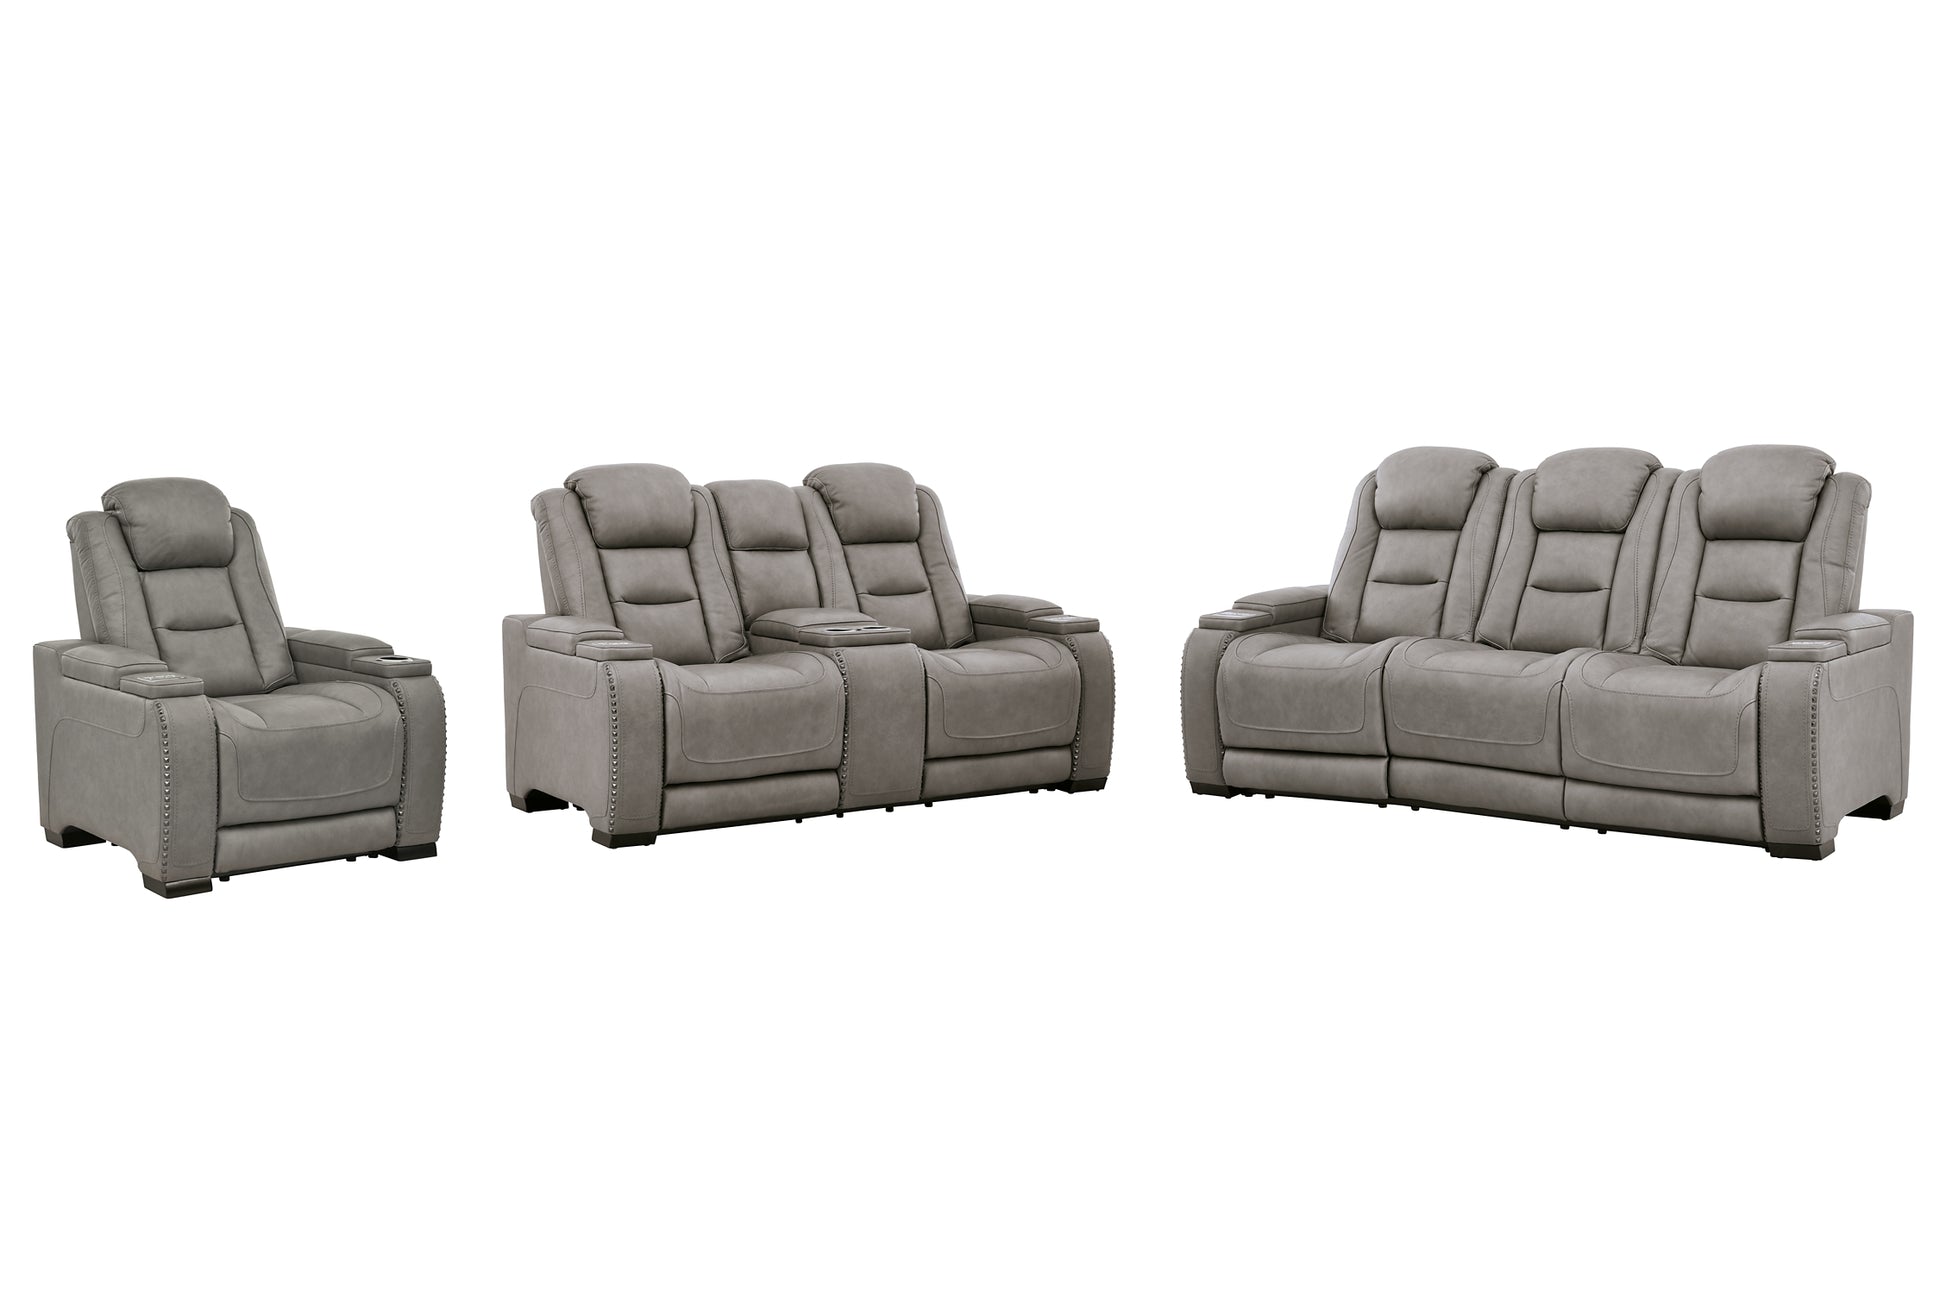 The Man-Den Sofa, Loveseat and Recliner Signature Design by Ashley®